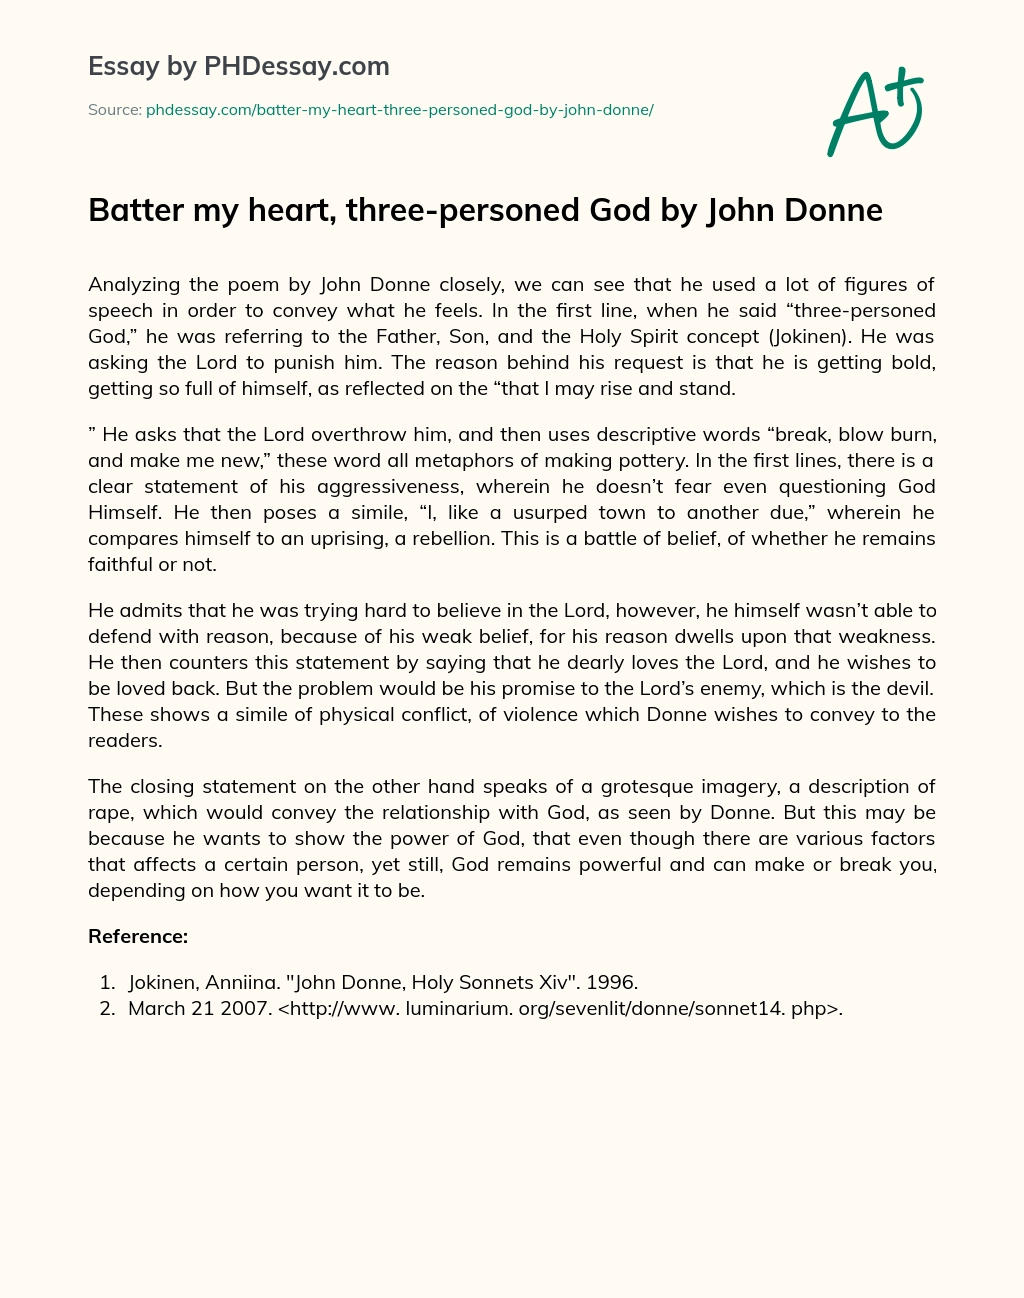 Batter my heart, three-personed God by John Donne essay